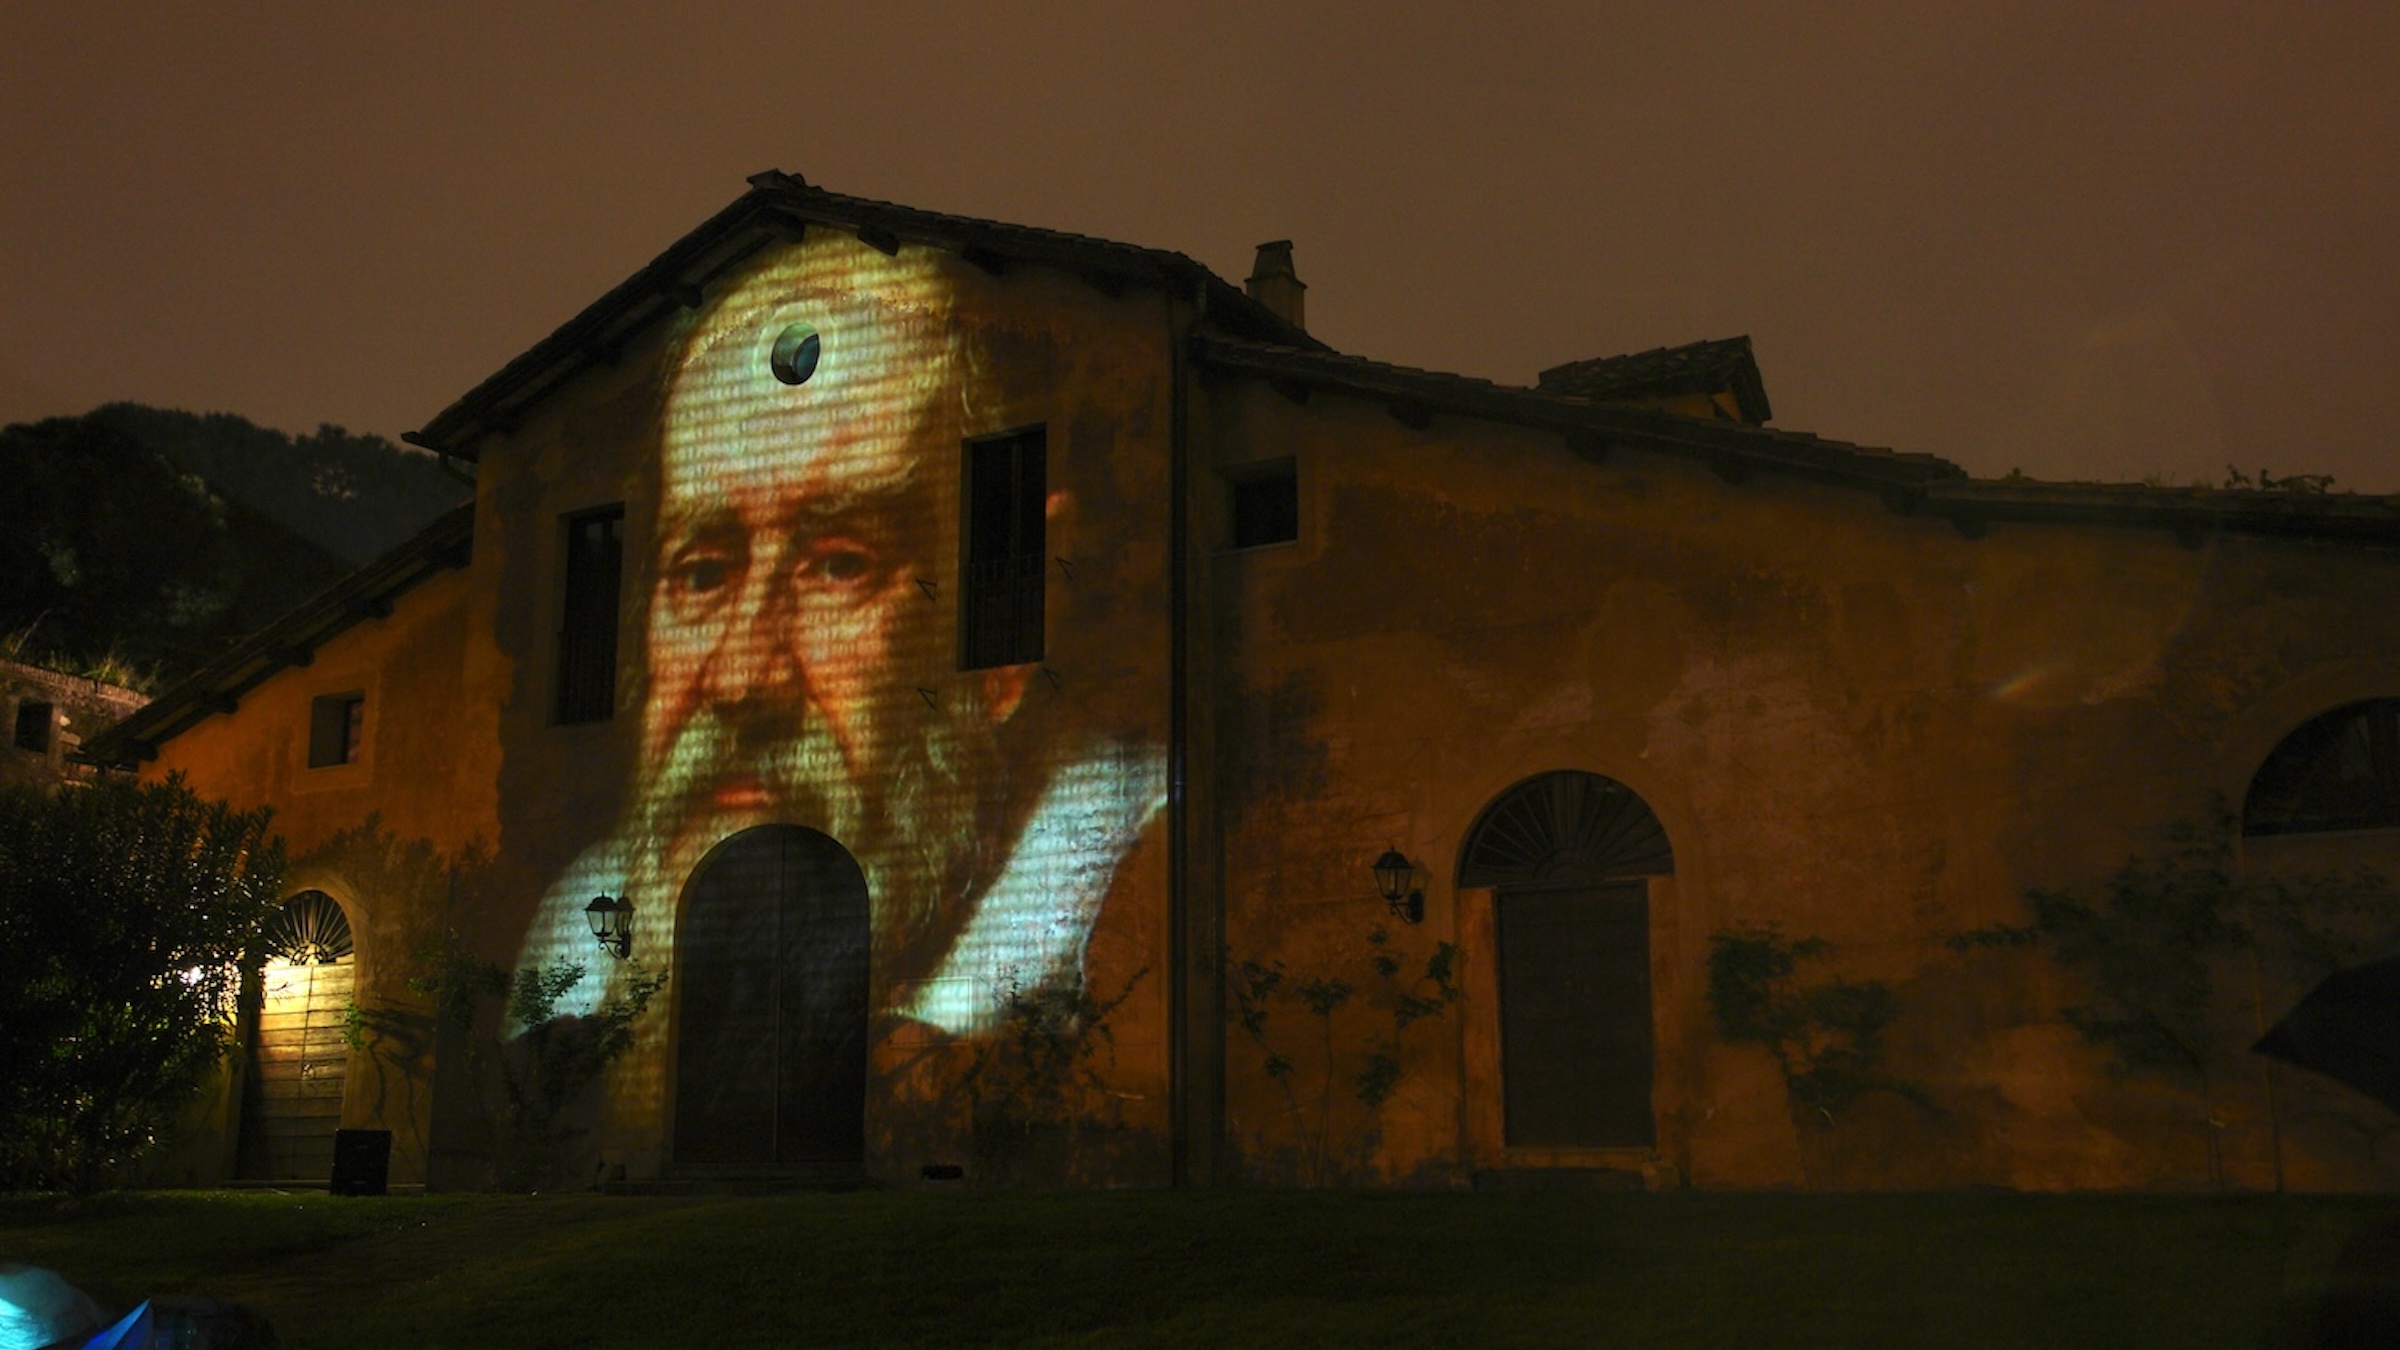 A projected image of Galileo on the face of an old building, dusk